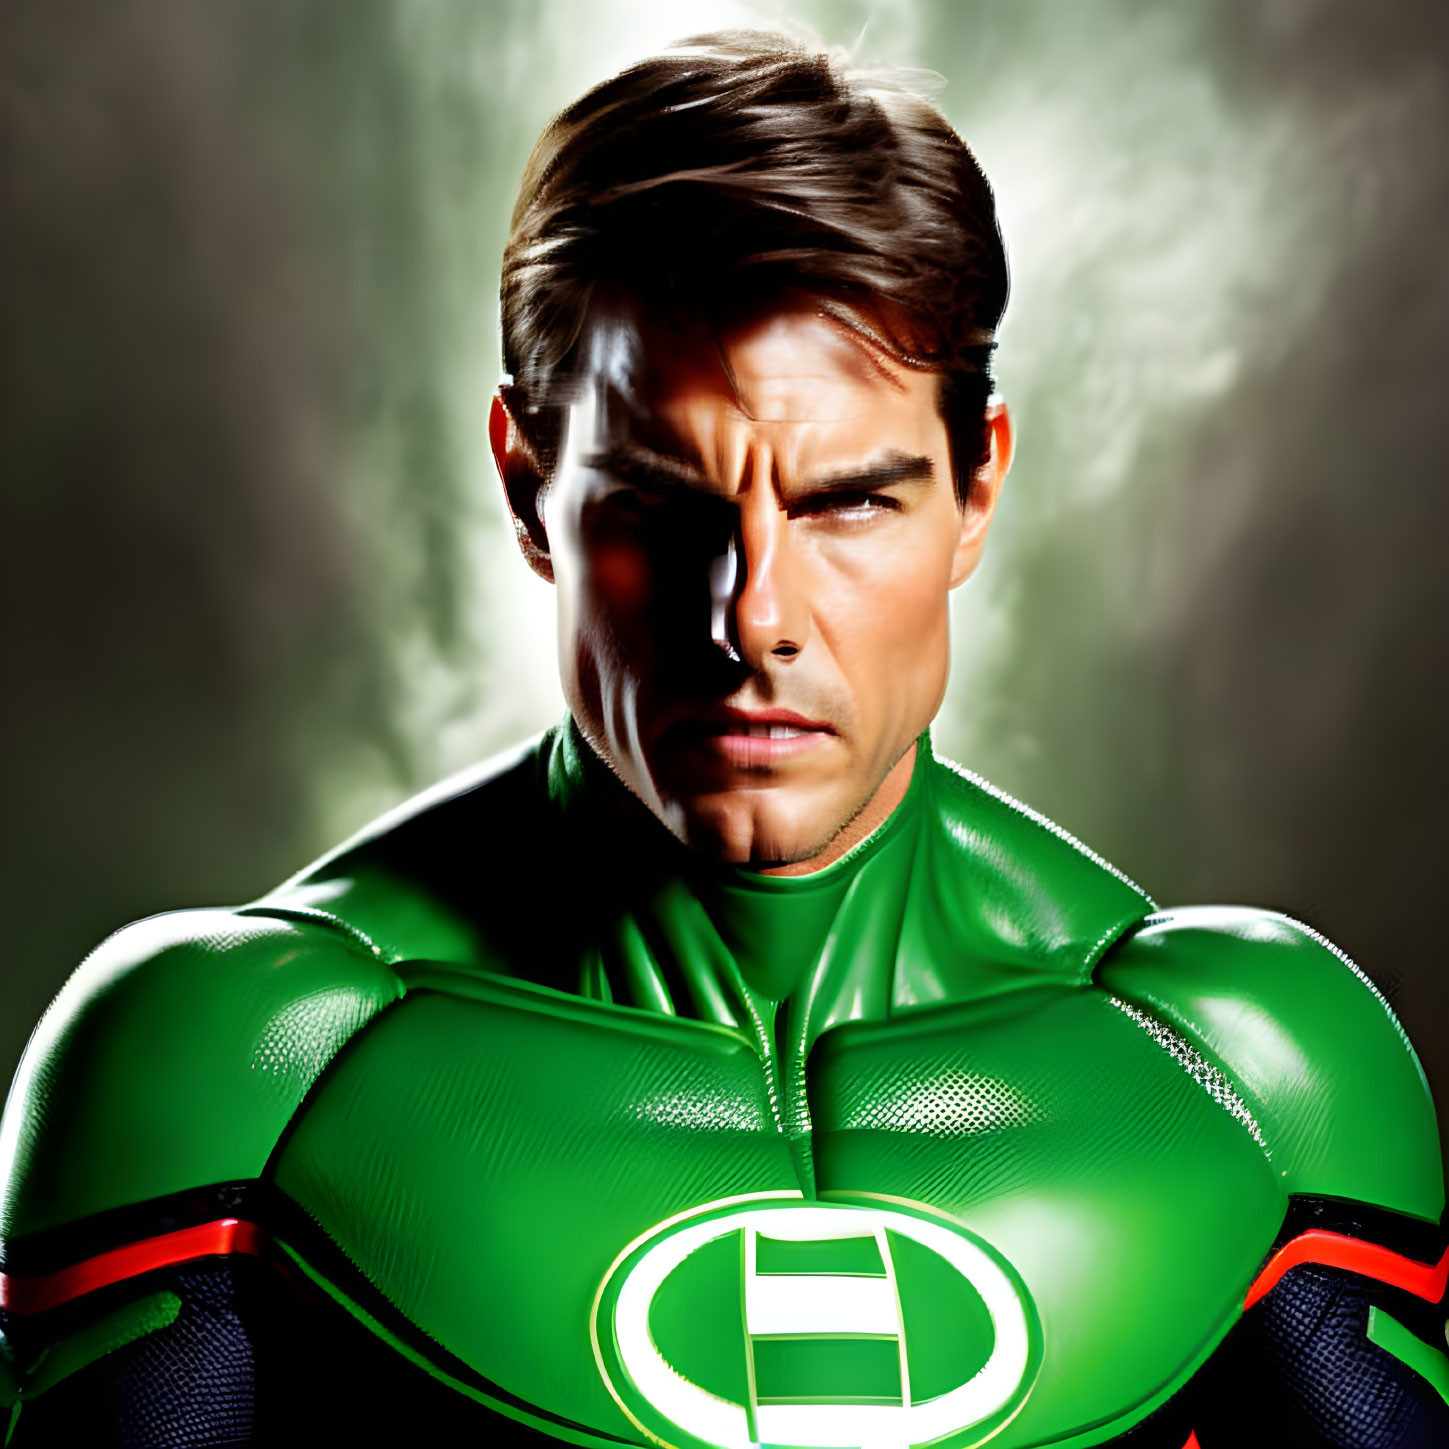 Superhero in Green and Black Suit with Glowing Emblem and Intense Gaze